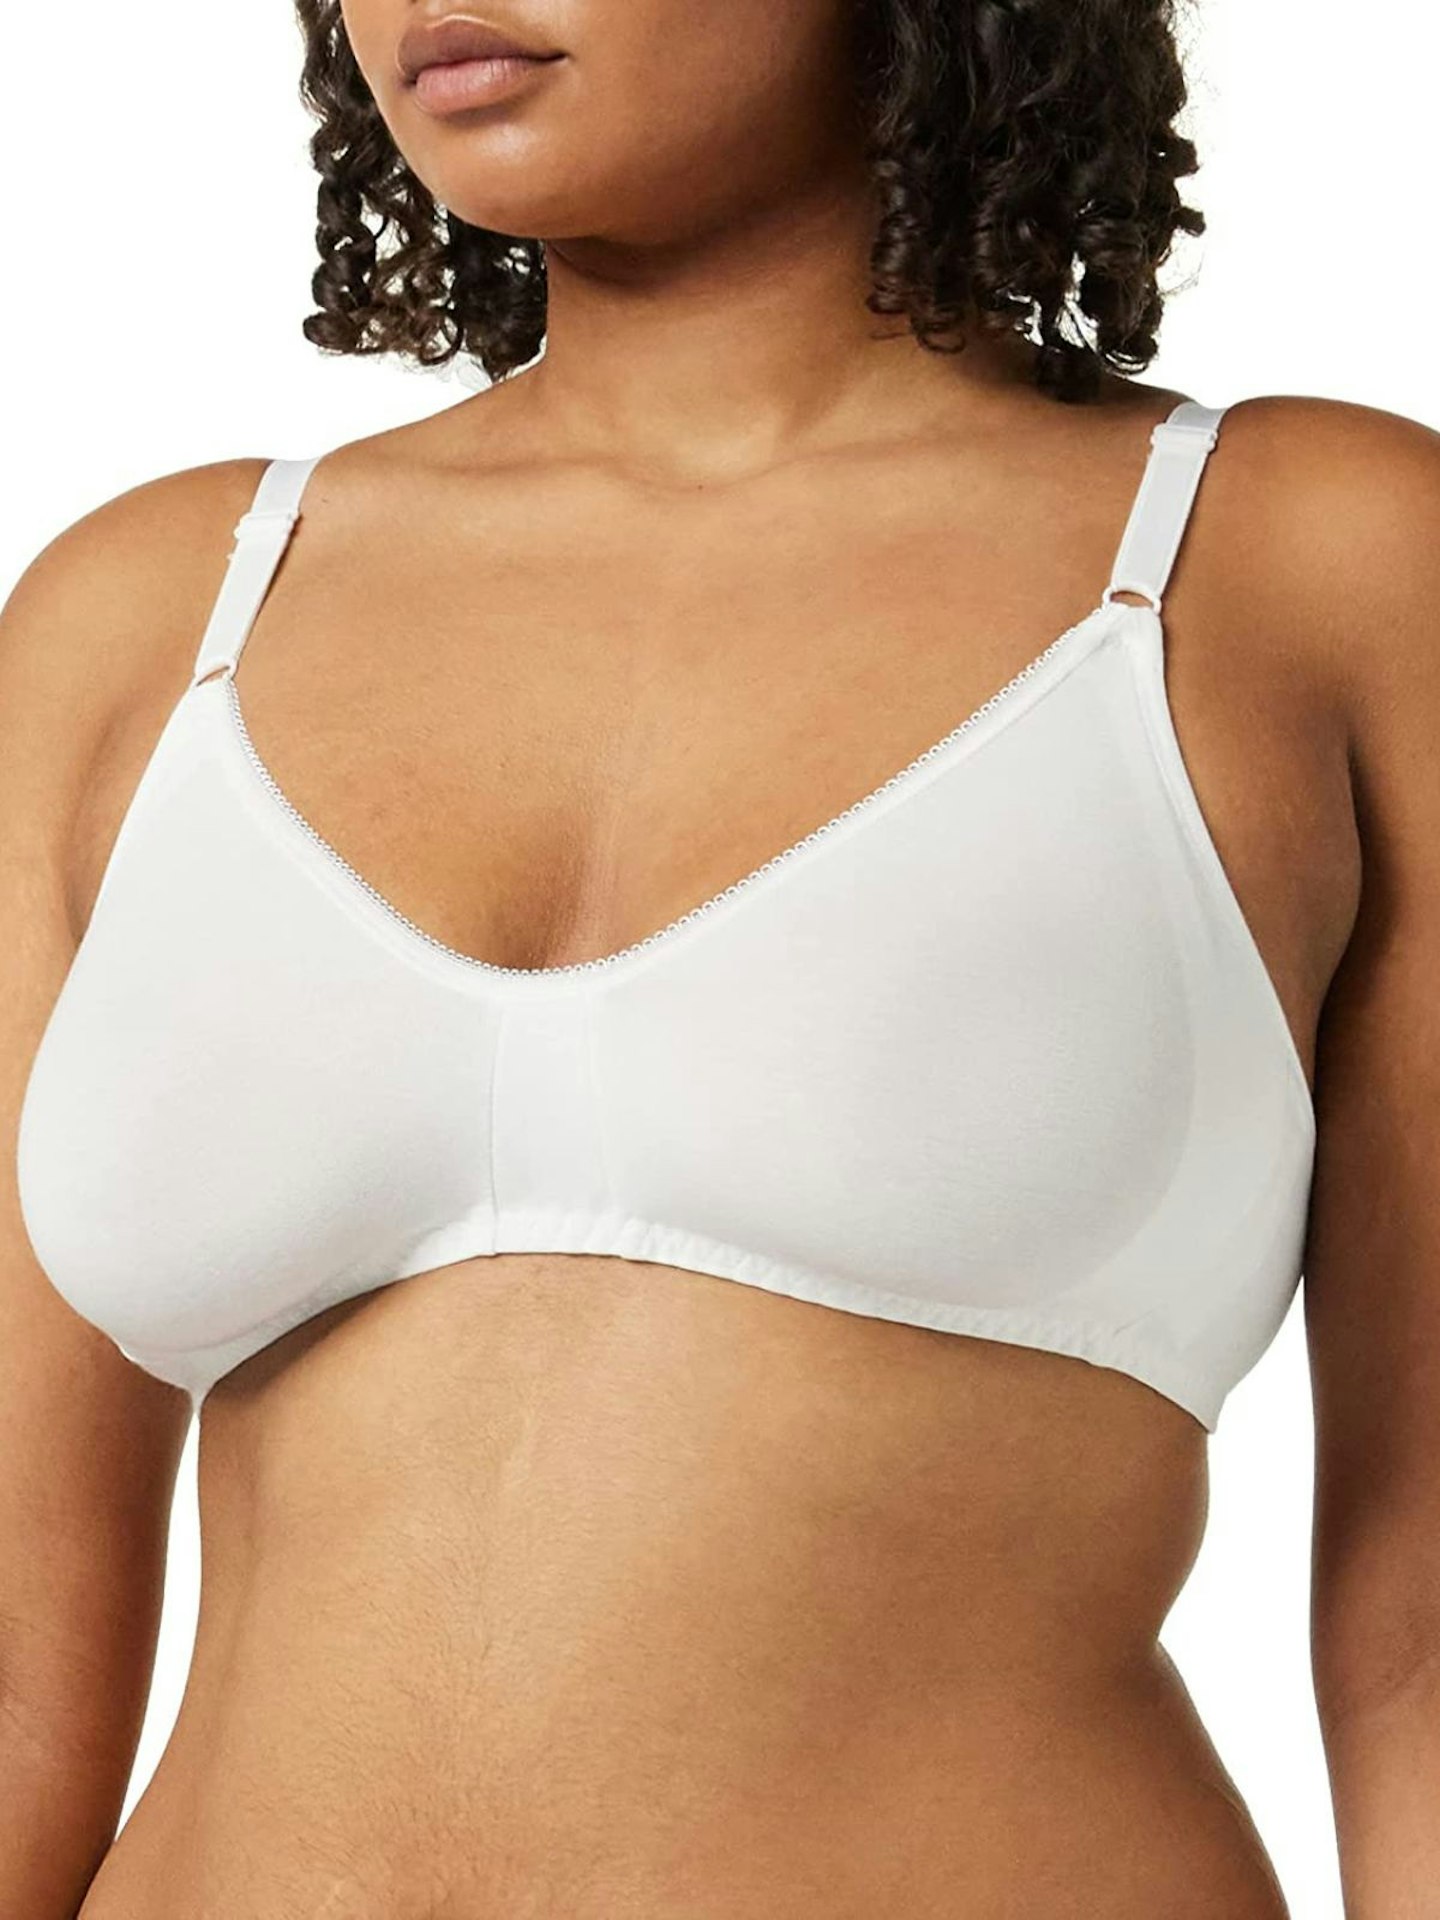 Bra Hack #9 Annoyed by those visible bra straps under halter neck outfits?  Here's a genius trick to solve the struggle!, clothing, neck